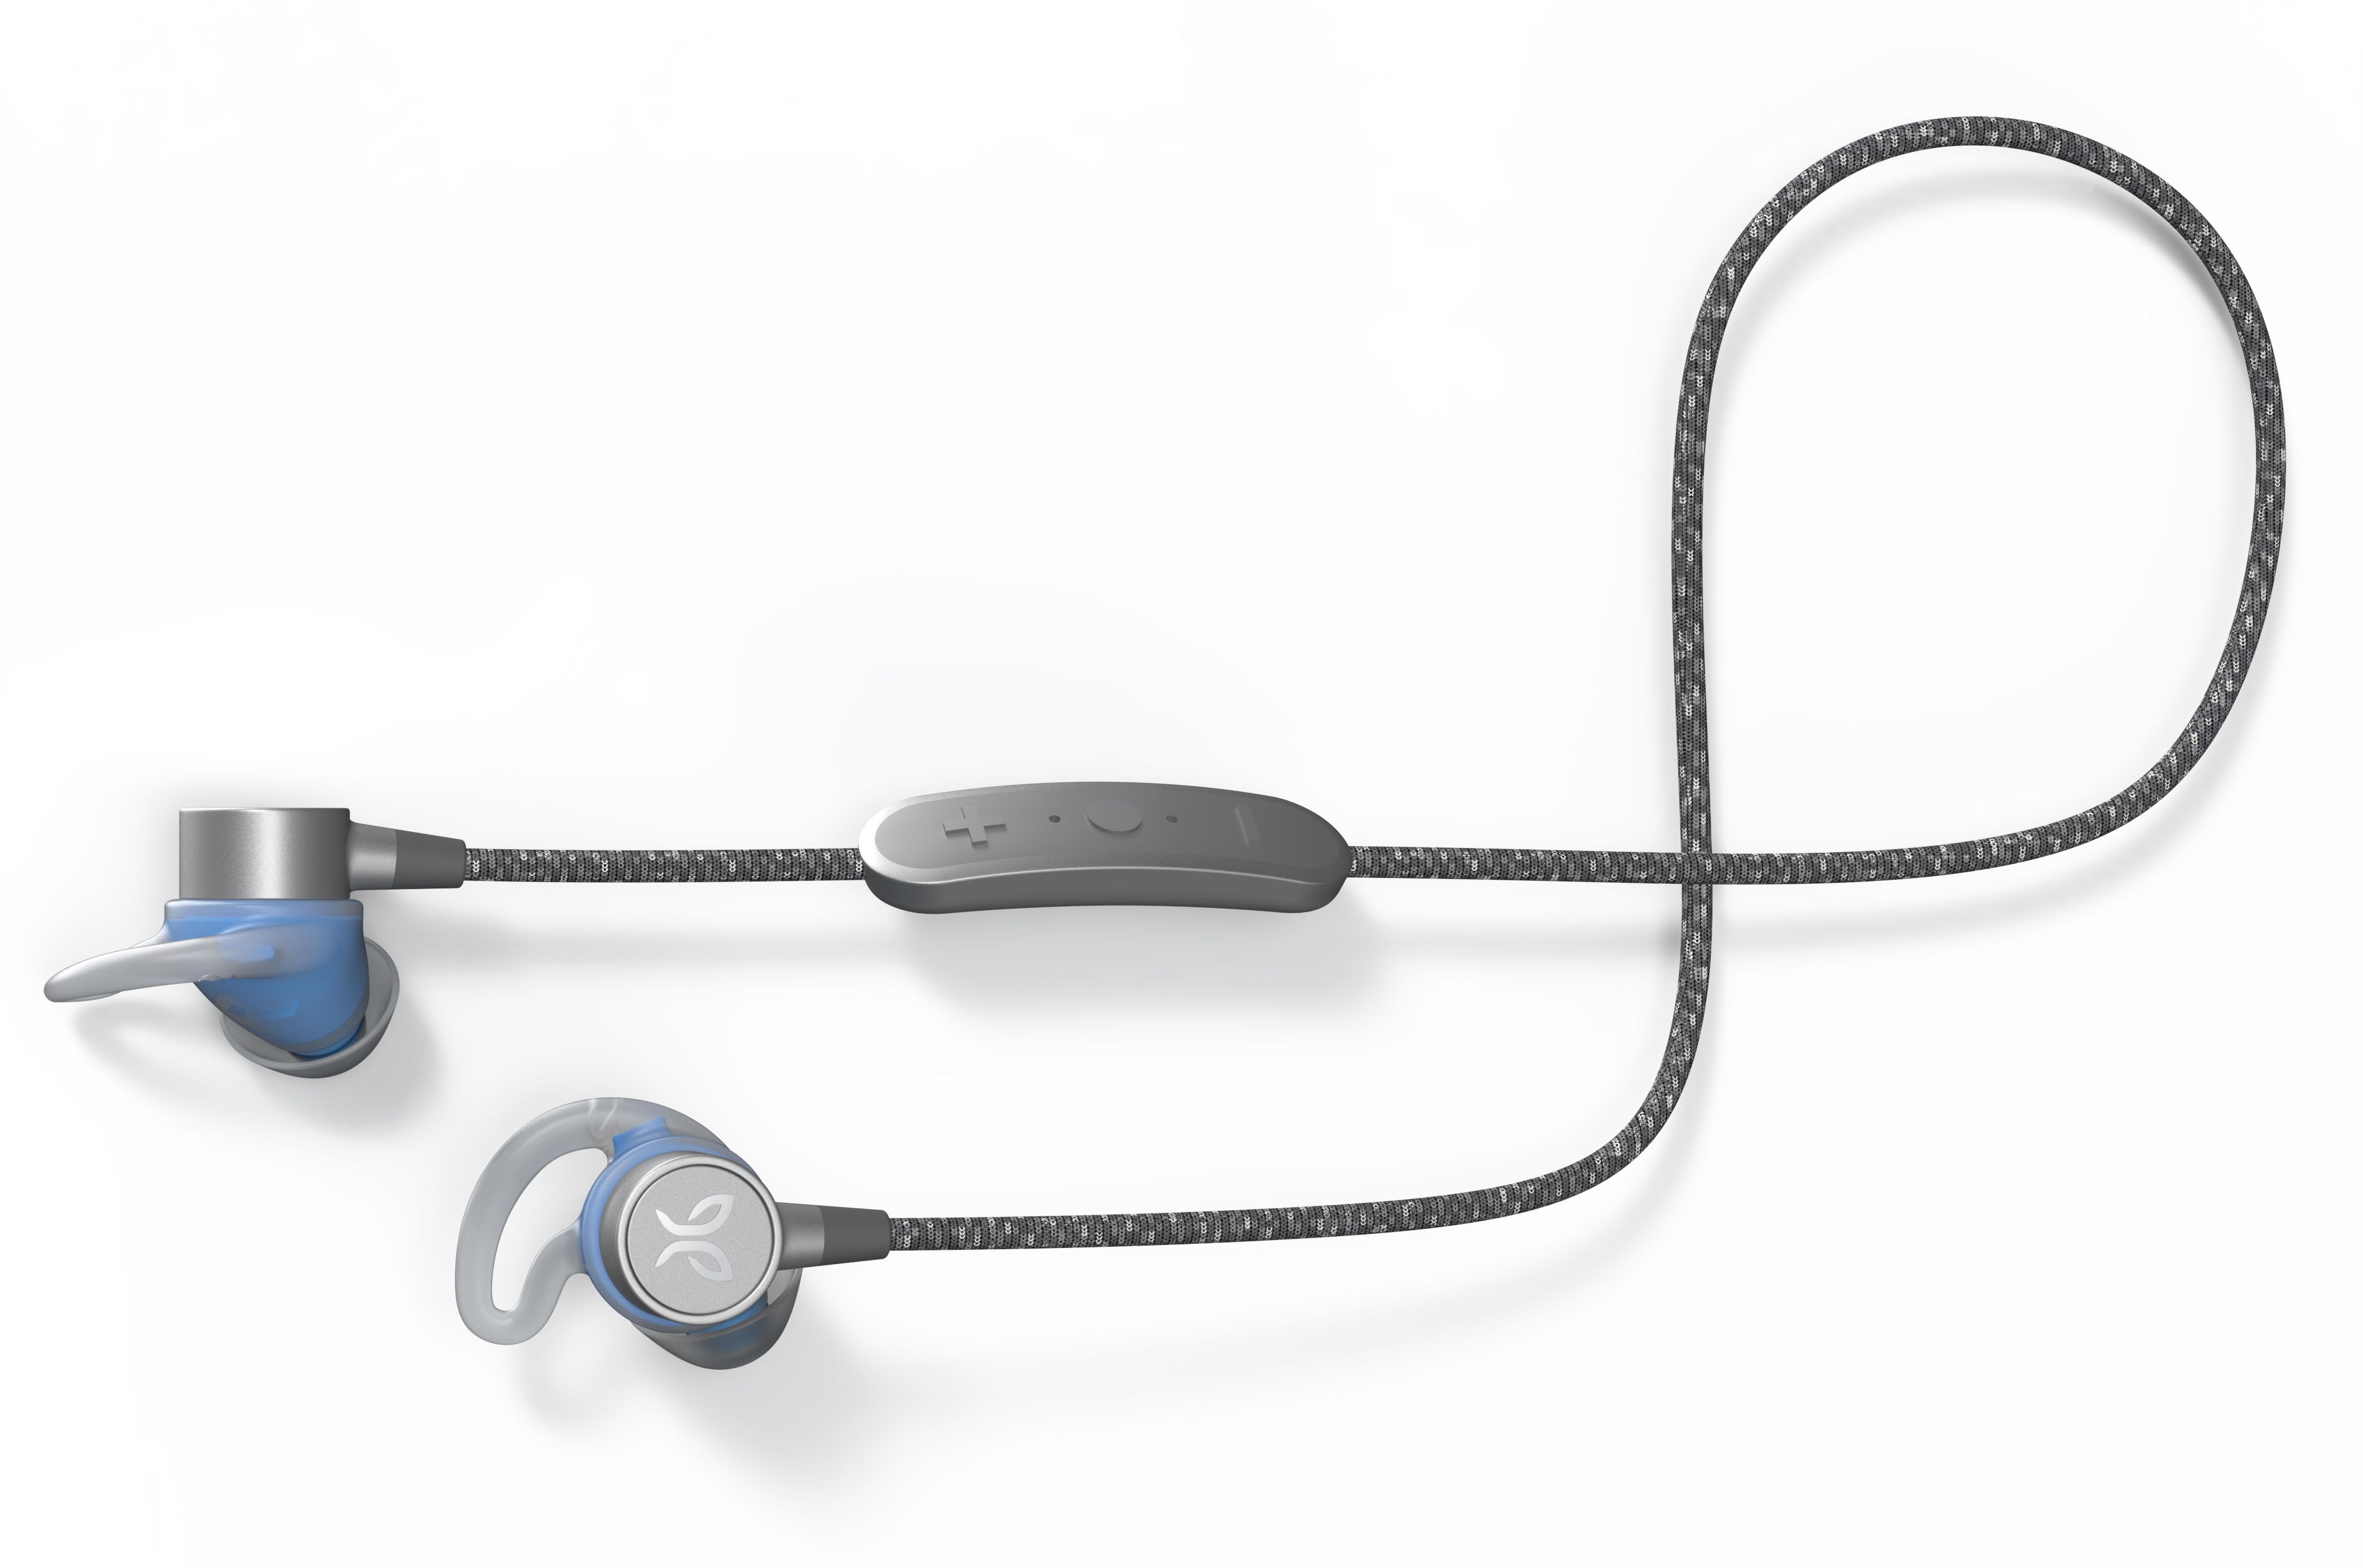 Jaybird Tarah Pro review: Sports earbuds that go the distance